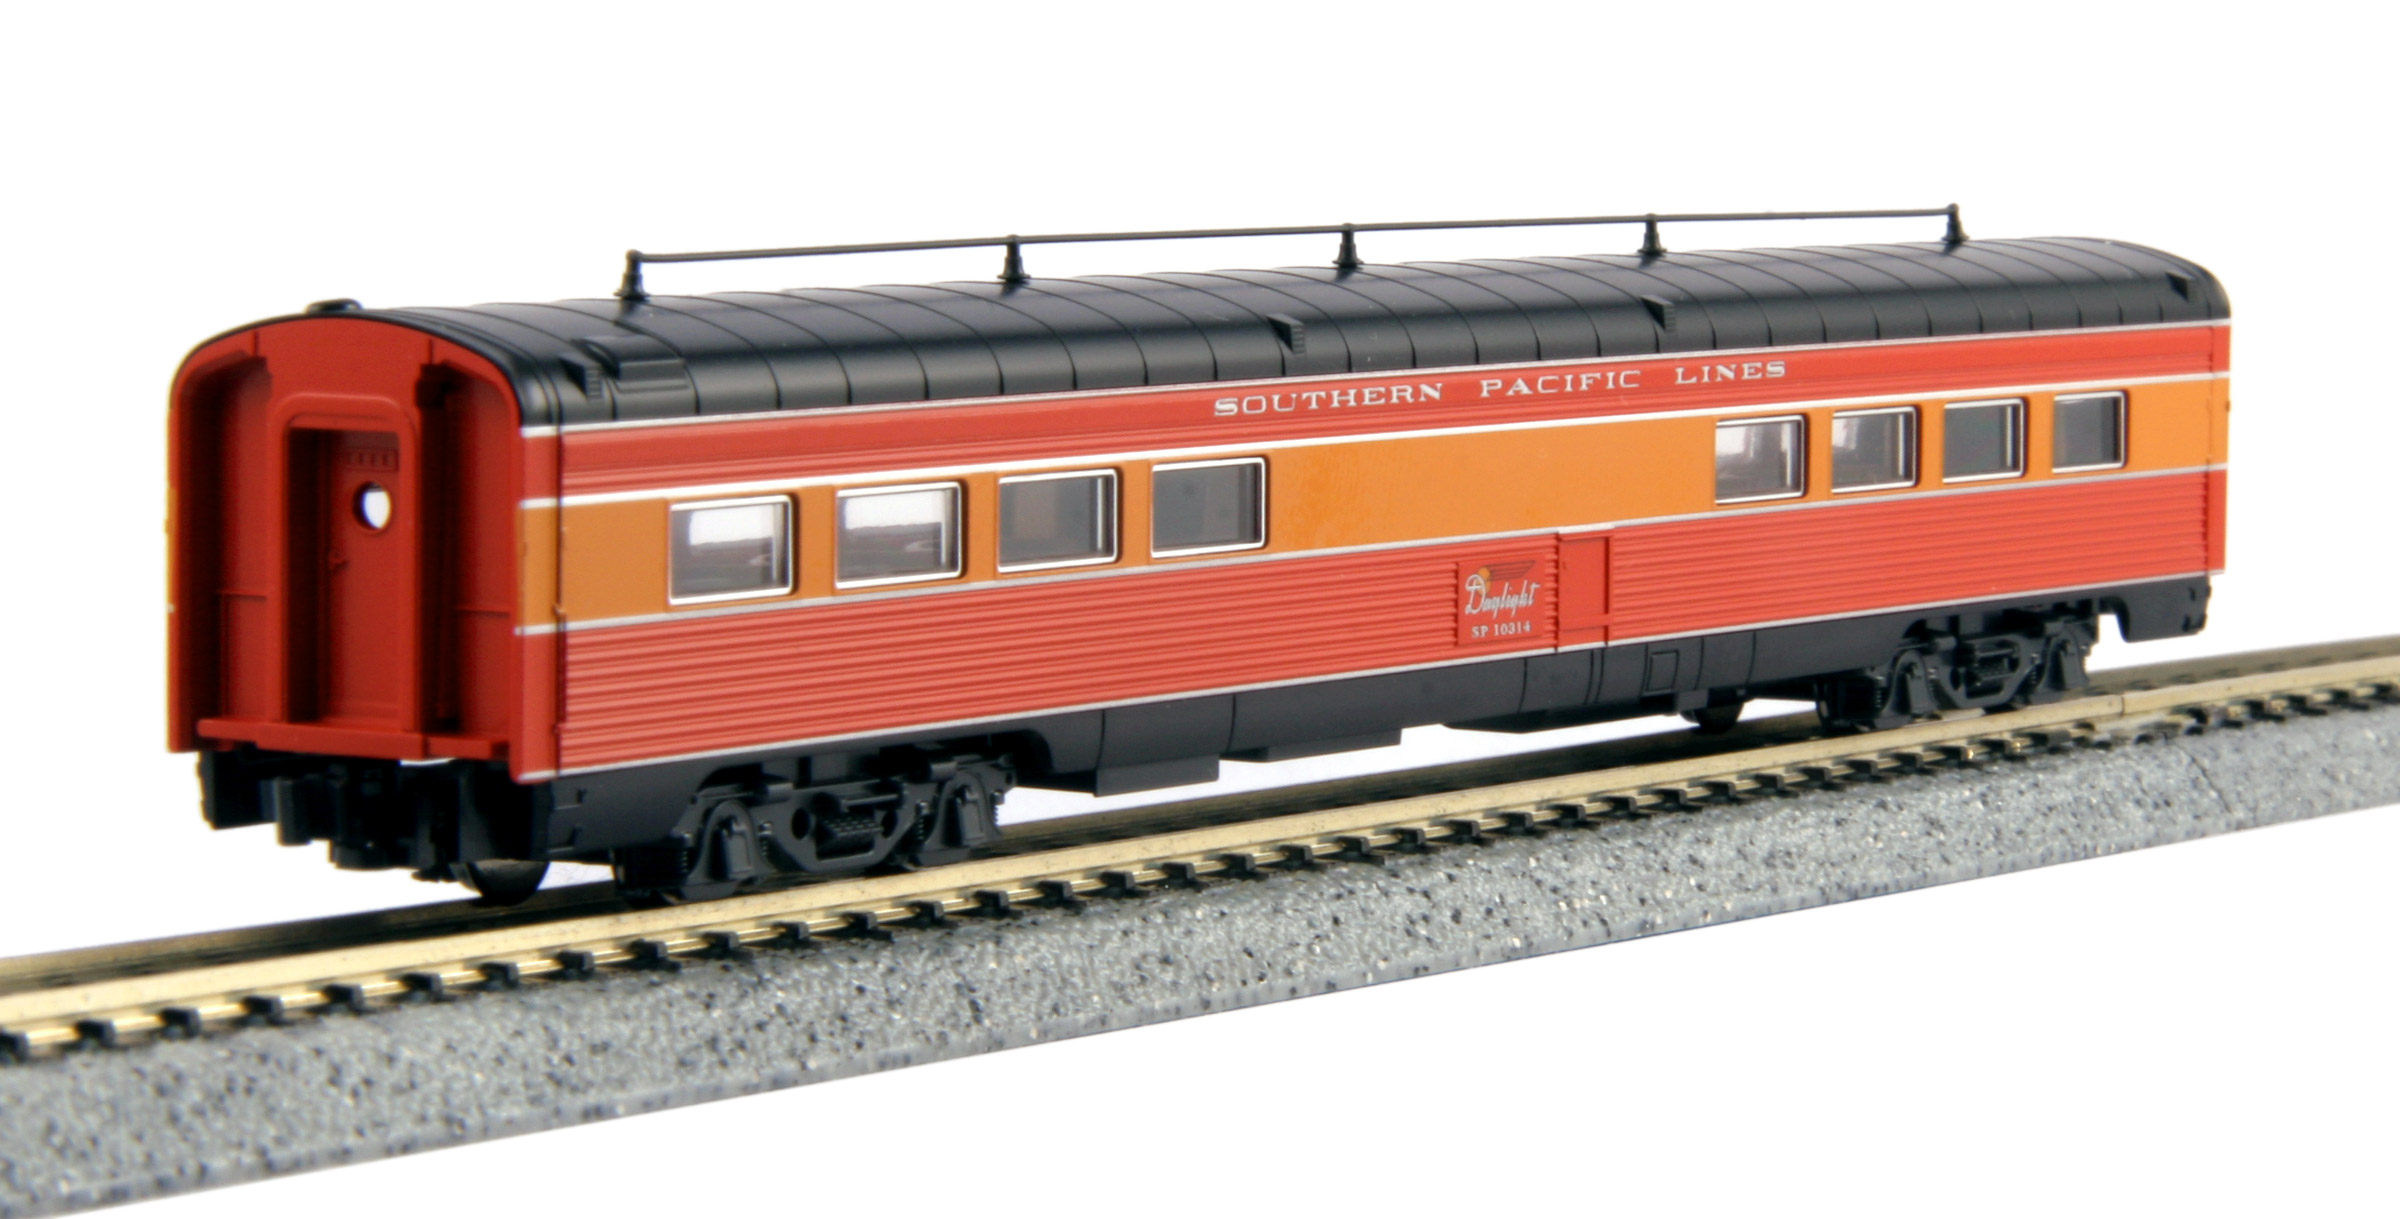 Kato N 106-063-1 Southern Pacific Lines 'Morning Daylight’ 10 Car Passenger  Set WITH Kato Light Kits Installed